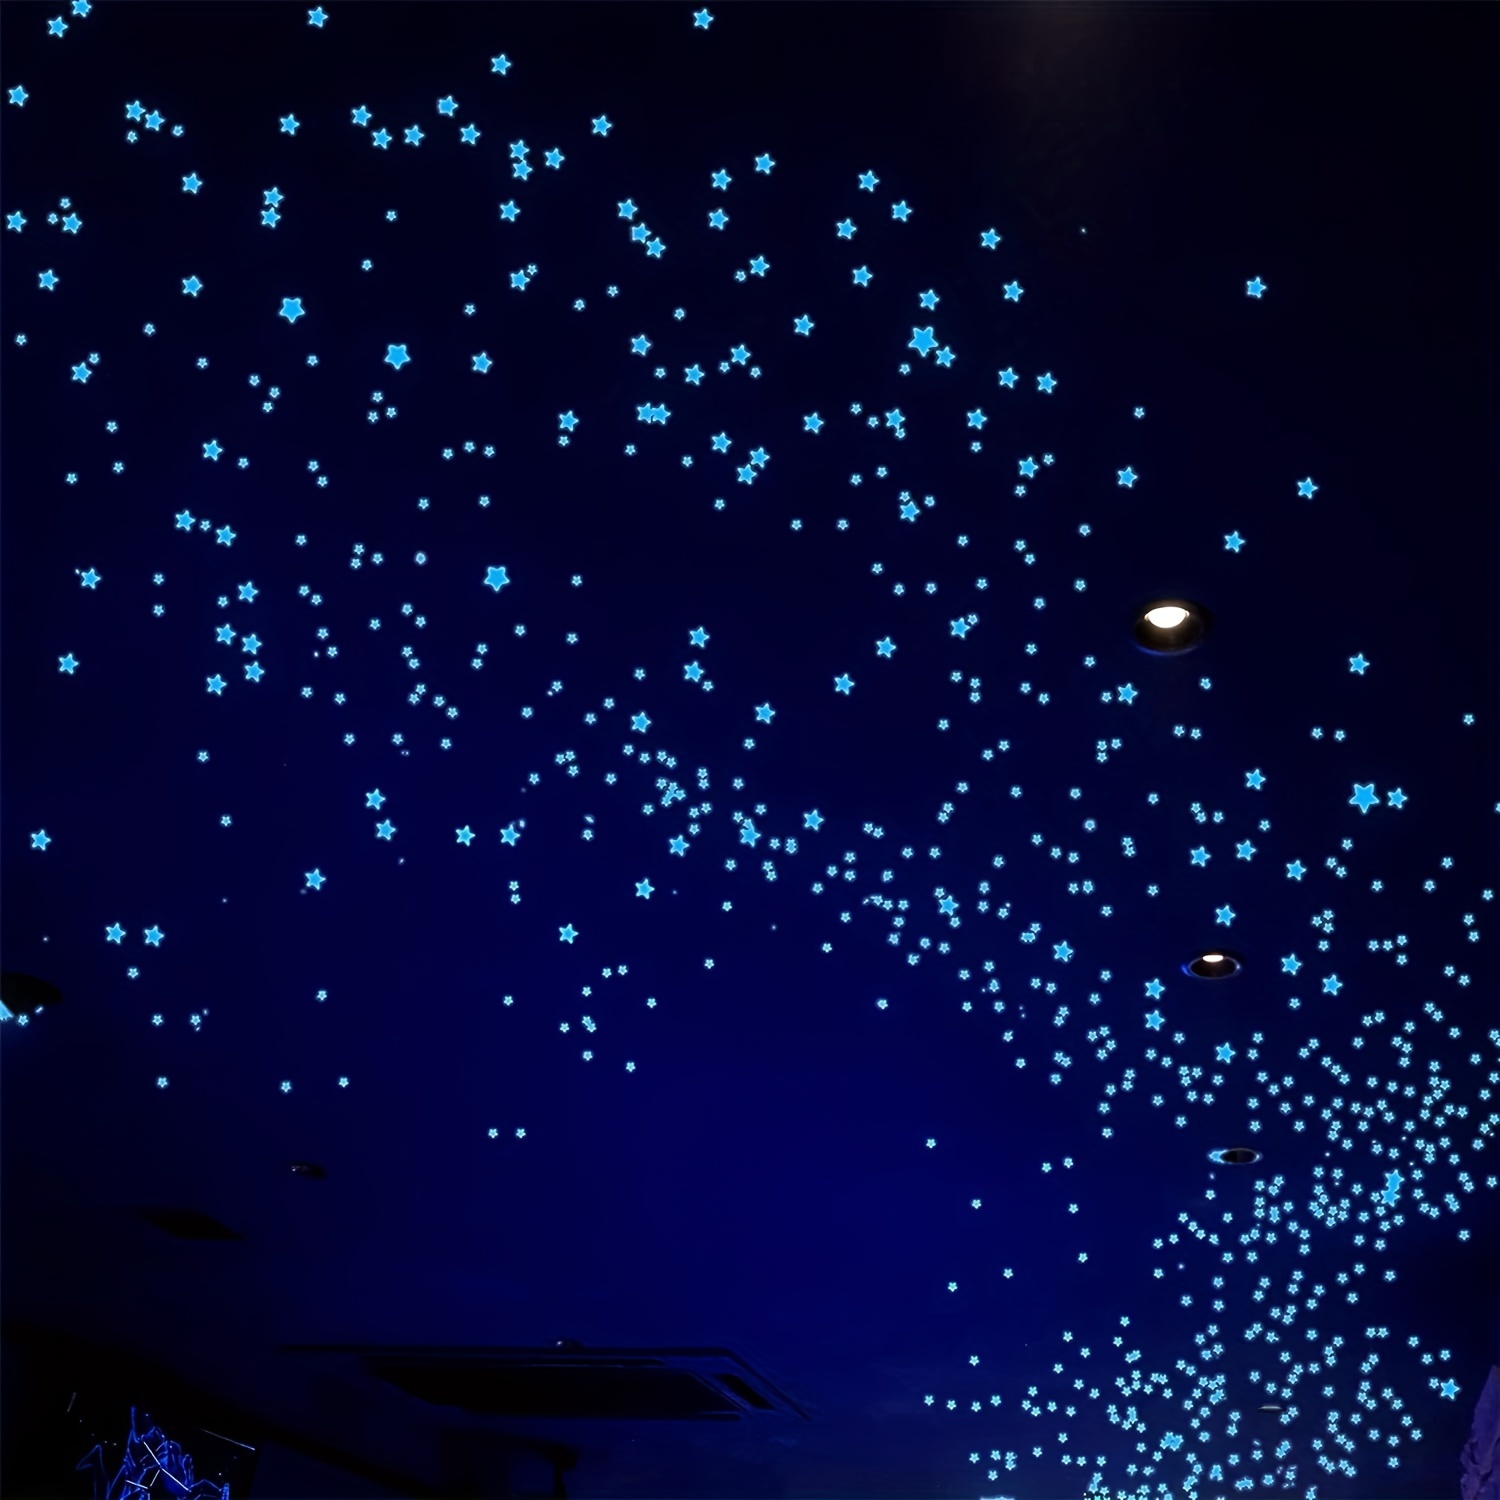 260 PCS Glow in The Dark Stars, Glowing Stars for Ceiling, Star Wall Decals  Solar System Space Galaxy Planets Wall Stickers for Kids, Girls Boys Room